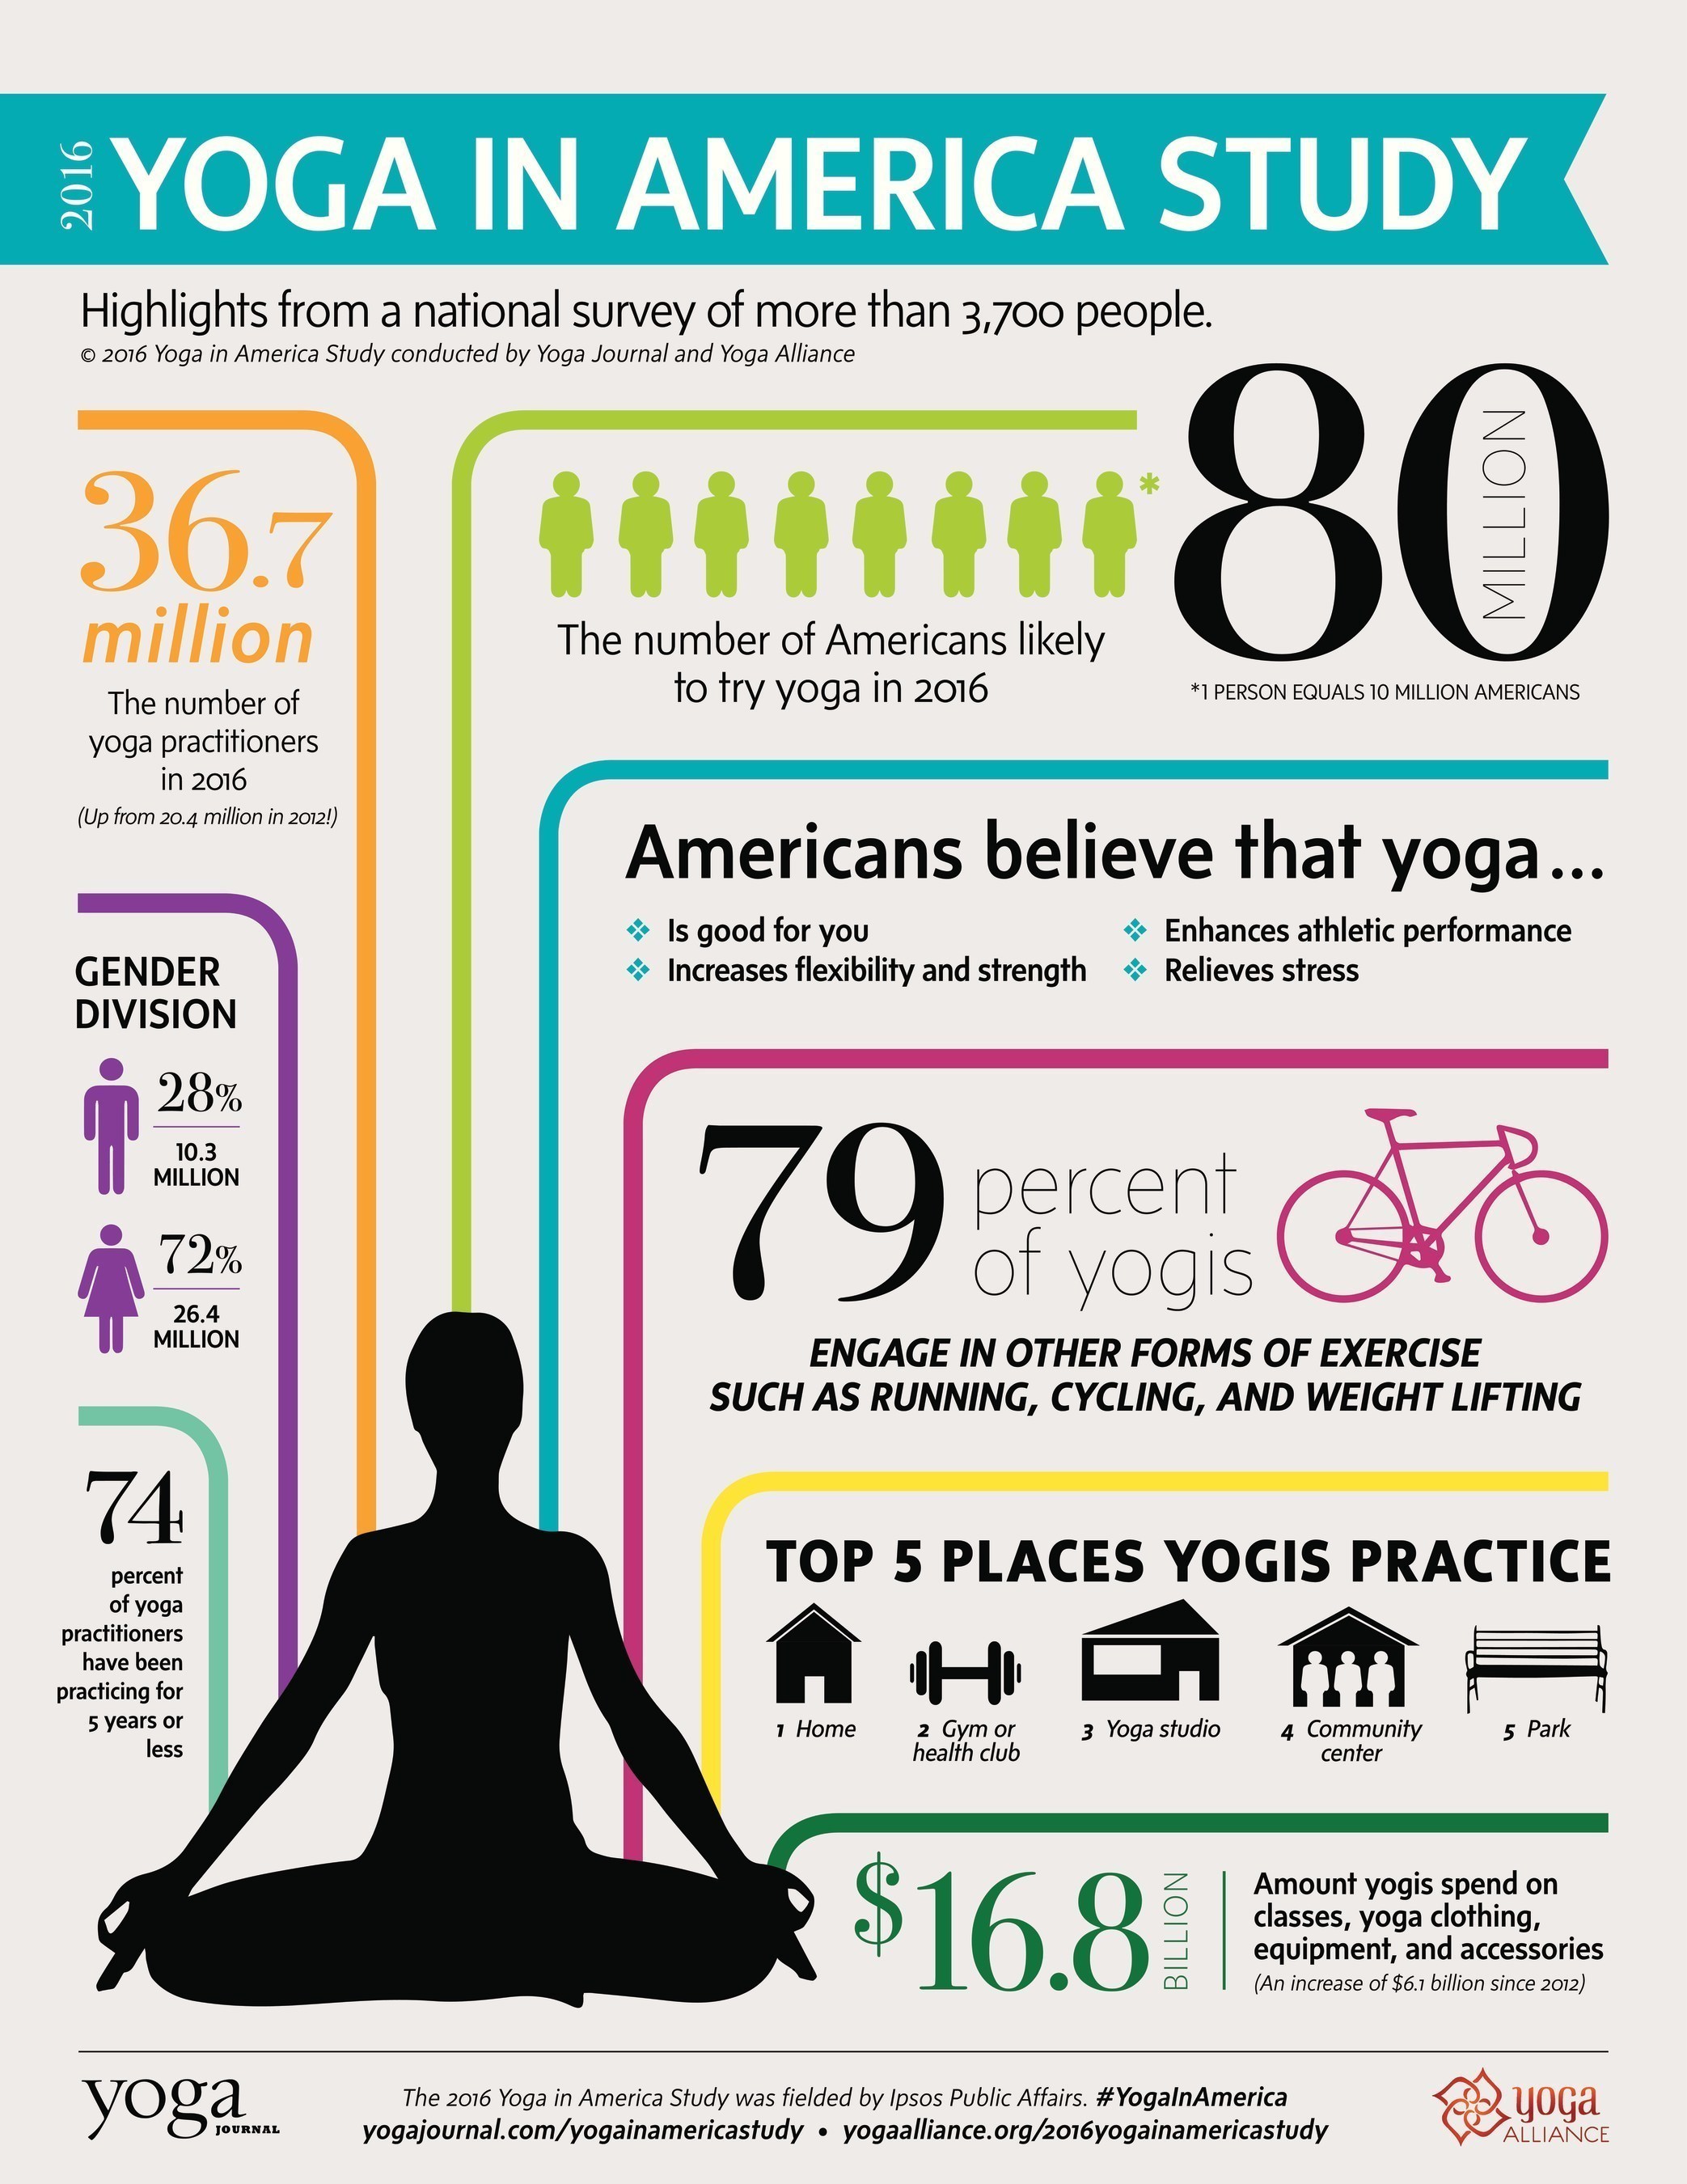 2016 Yoga in America Study Conducted by Yoga Journal and Yoga Alliance